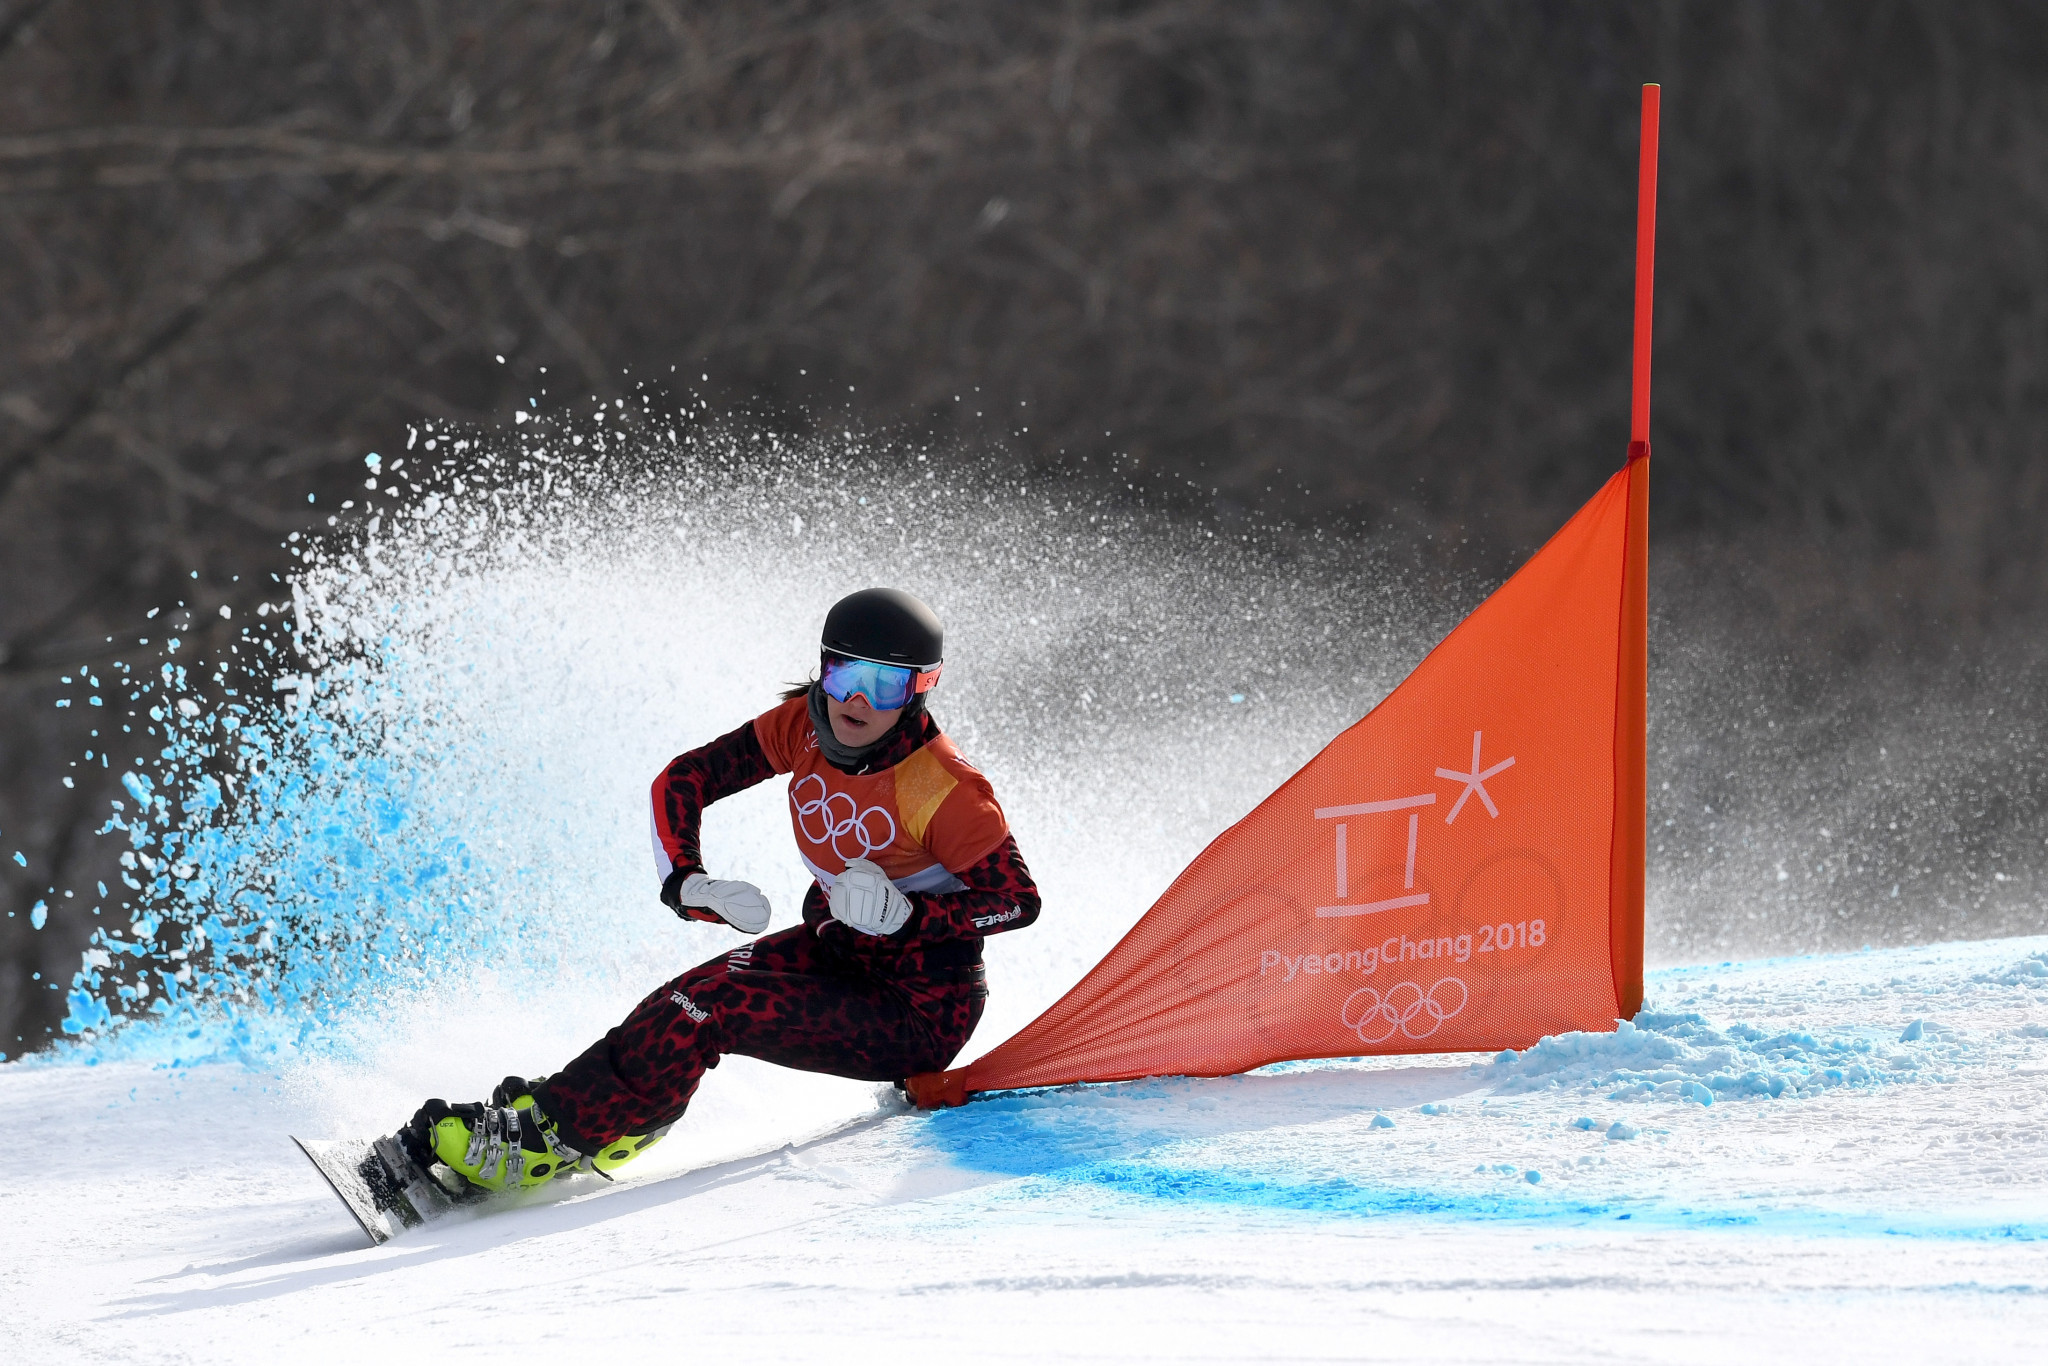 Ulbing and Karl win Snowboard World Cup parallel slalom team event for Austria